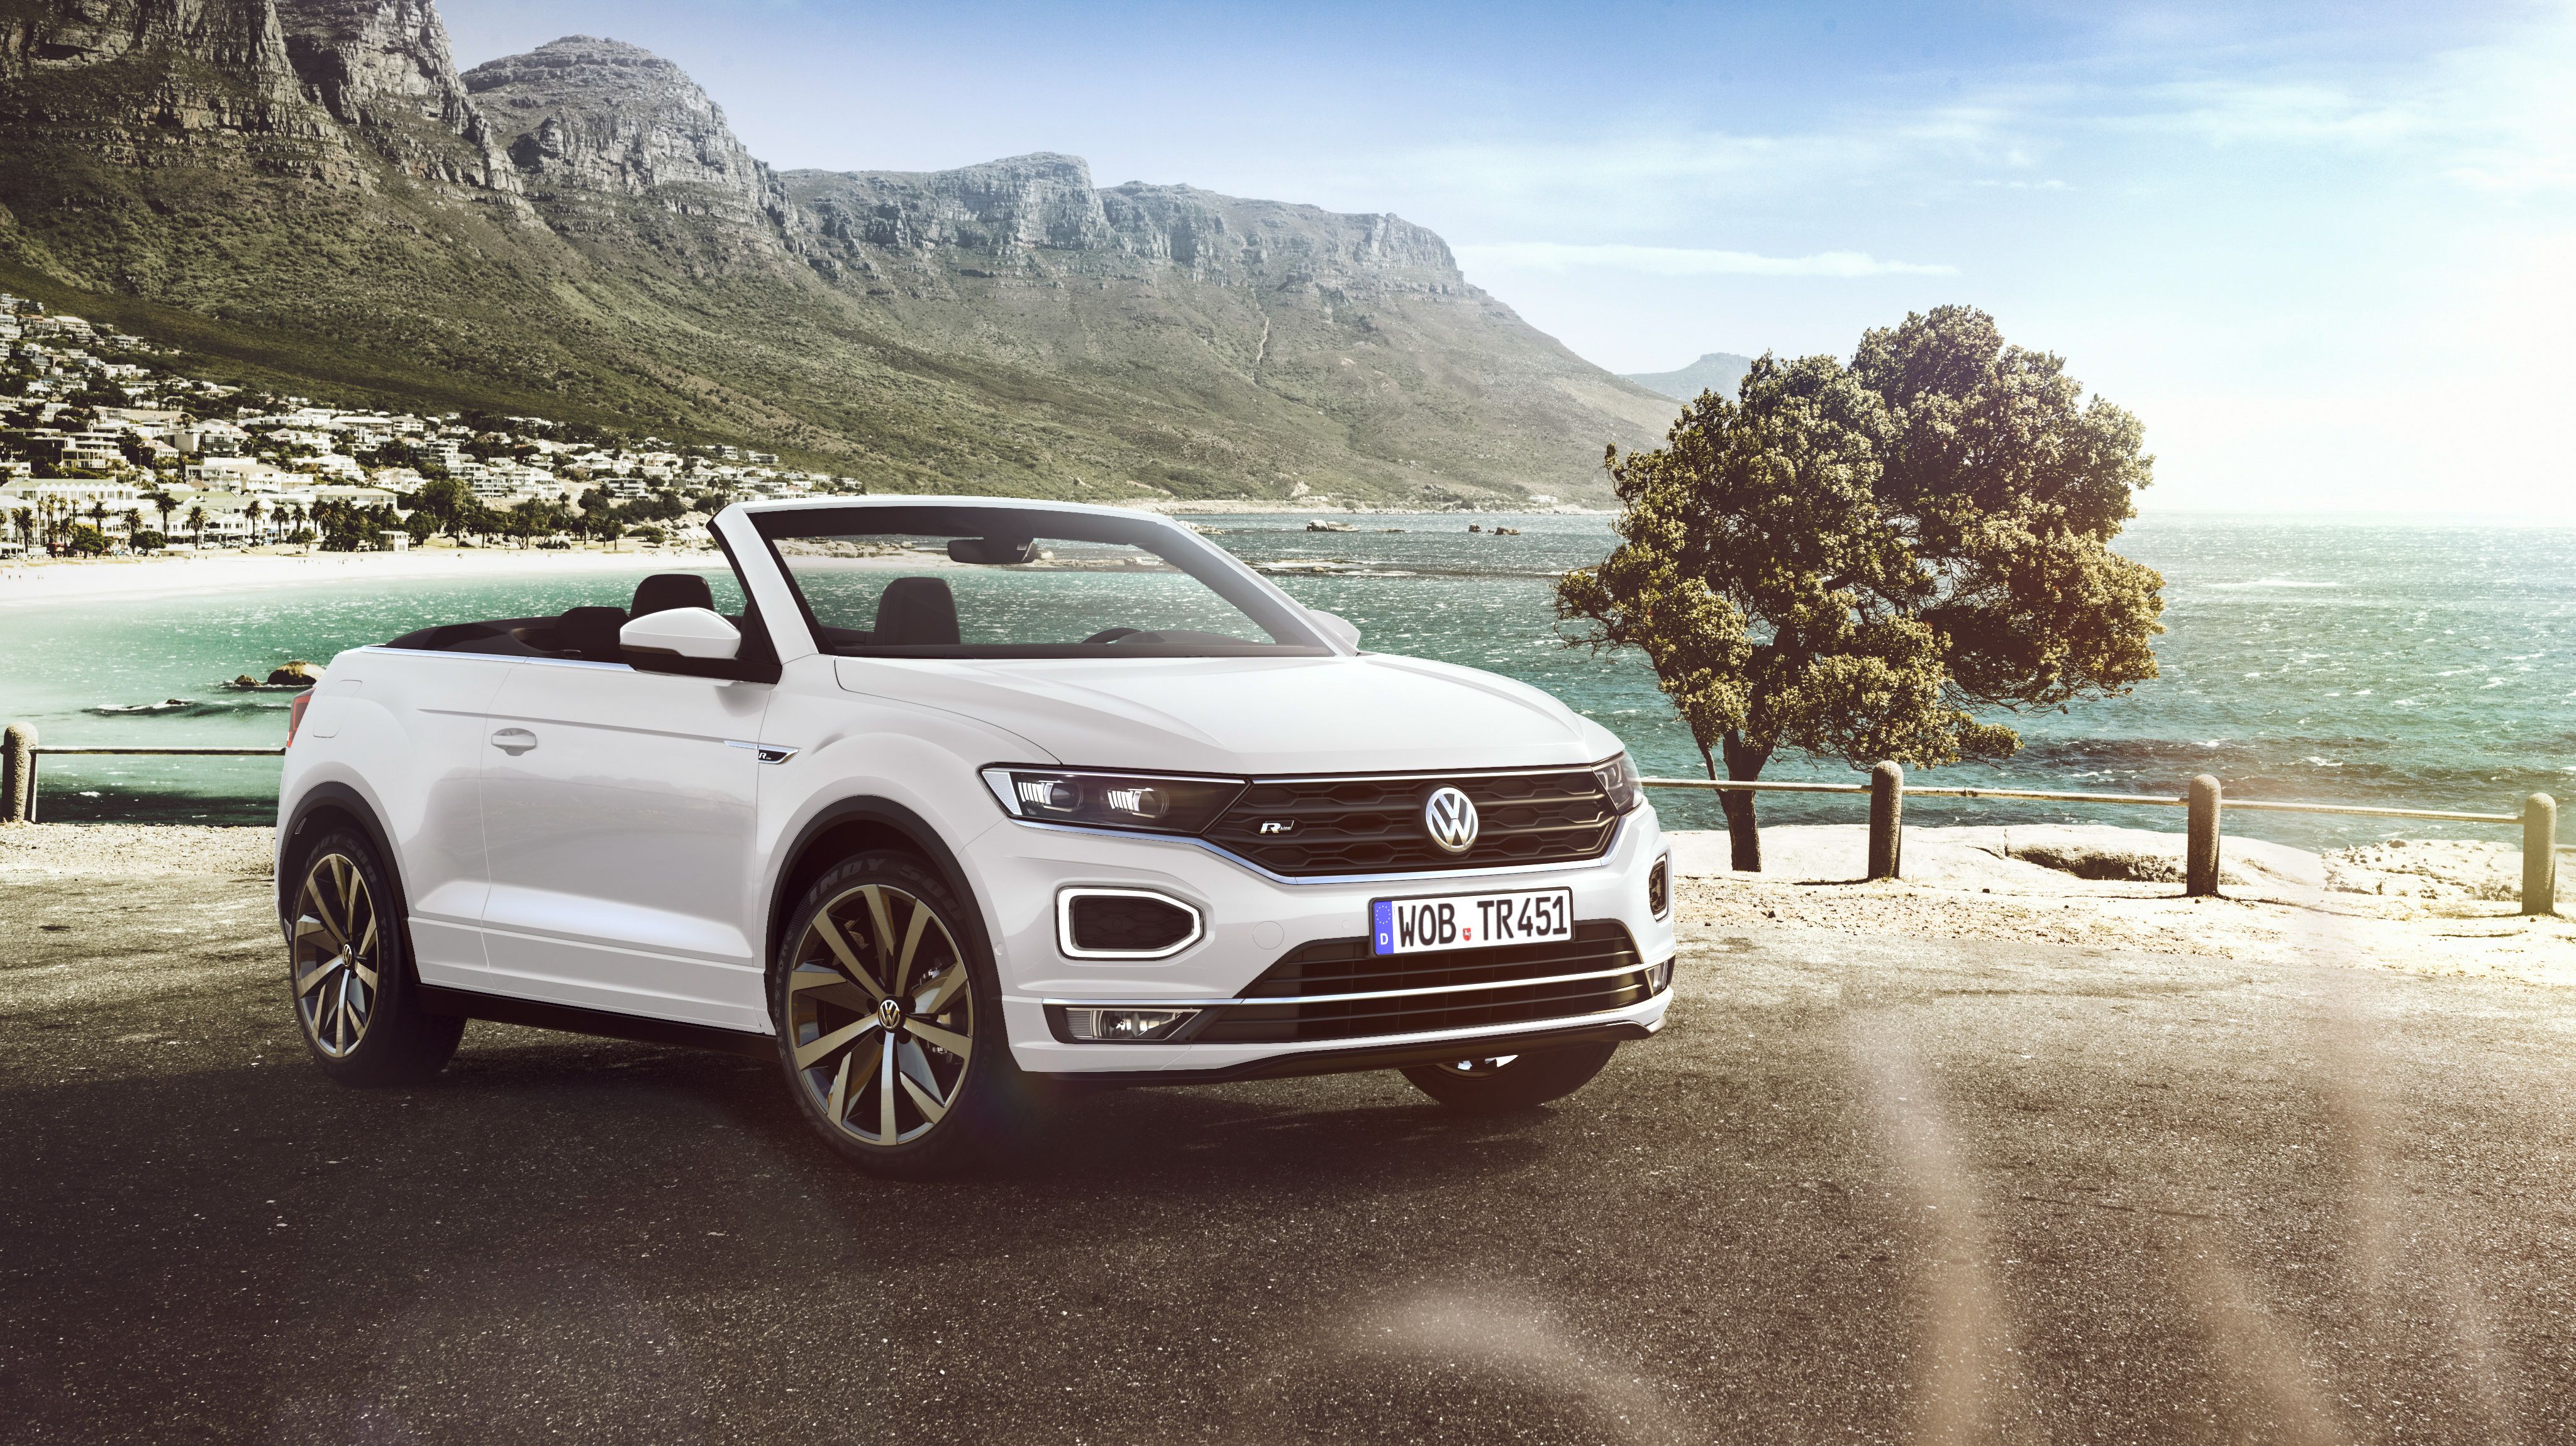 VW's T-Roc Convertible Is the Spiritual Successor to the Golf Cabriolet